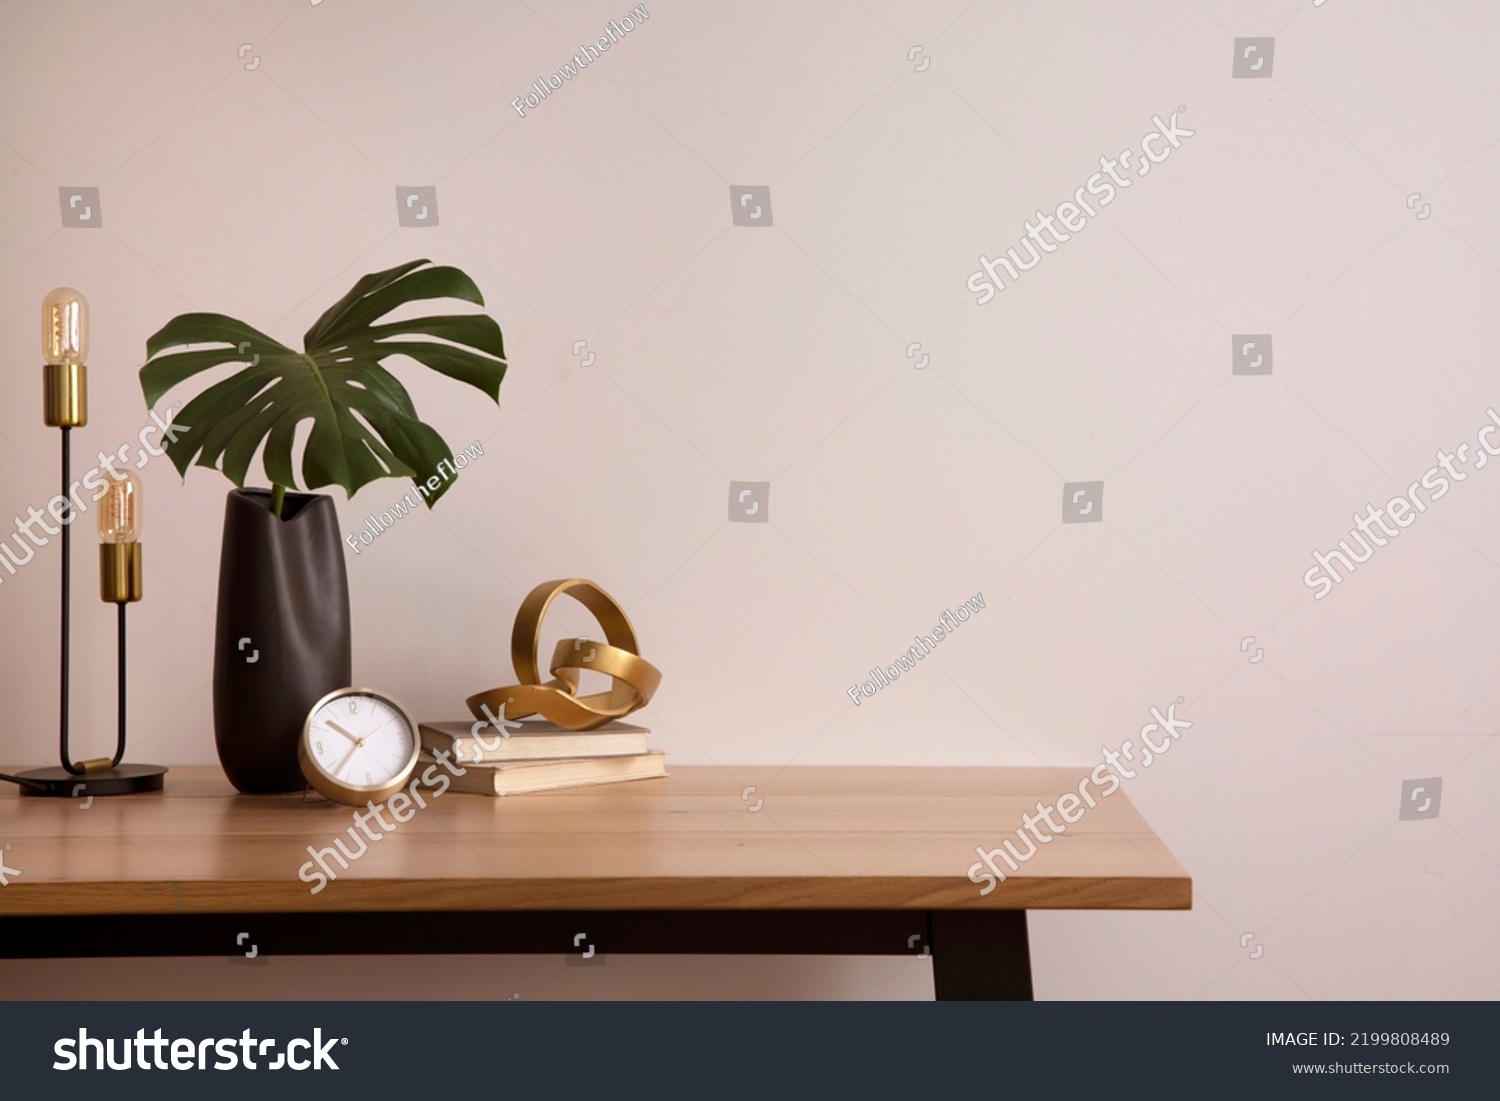 Minimalist composition of elegant home office space with design chair, black vase with leaf, sculpture, book and personal accessories. Copy space. Minimalist home decor. Template.	
 #2199808489